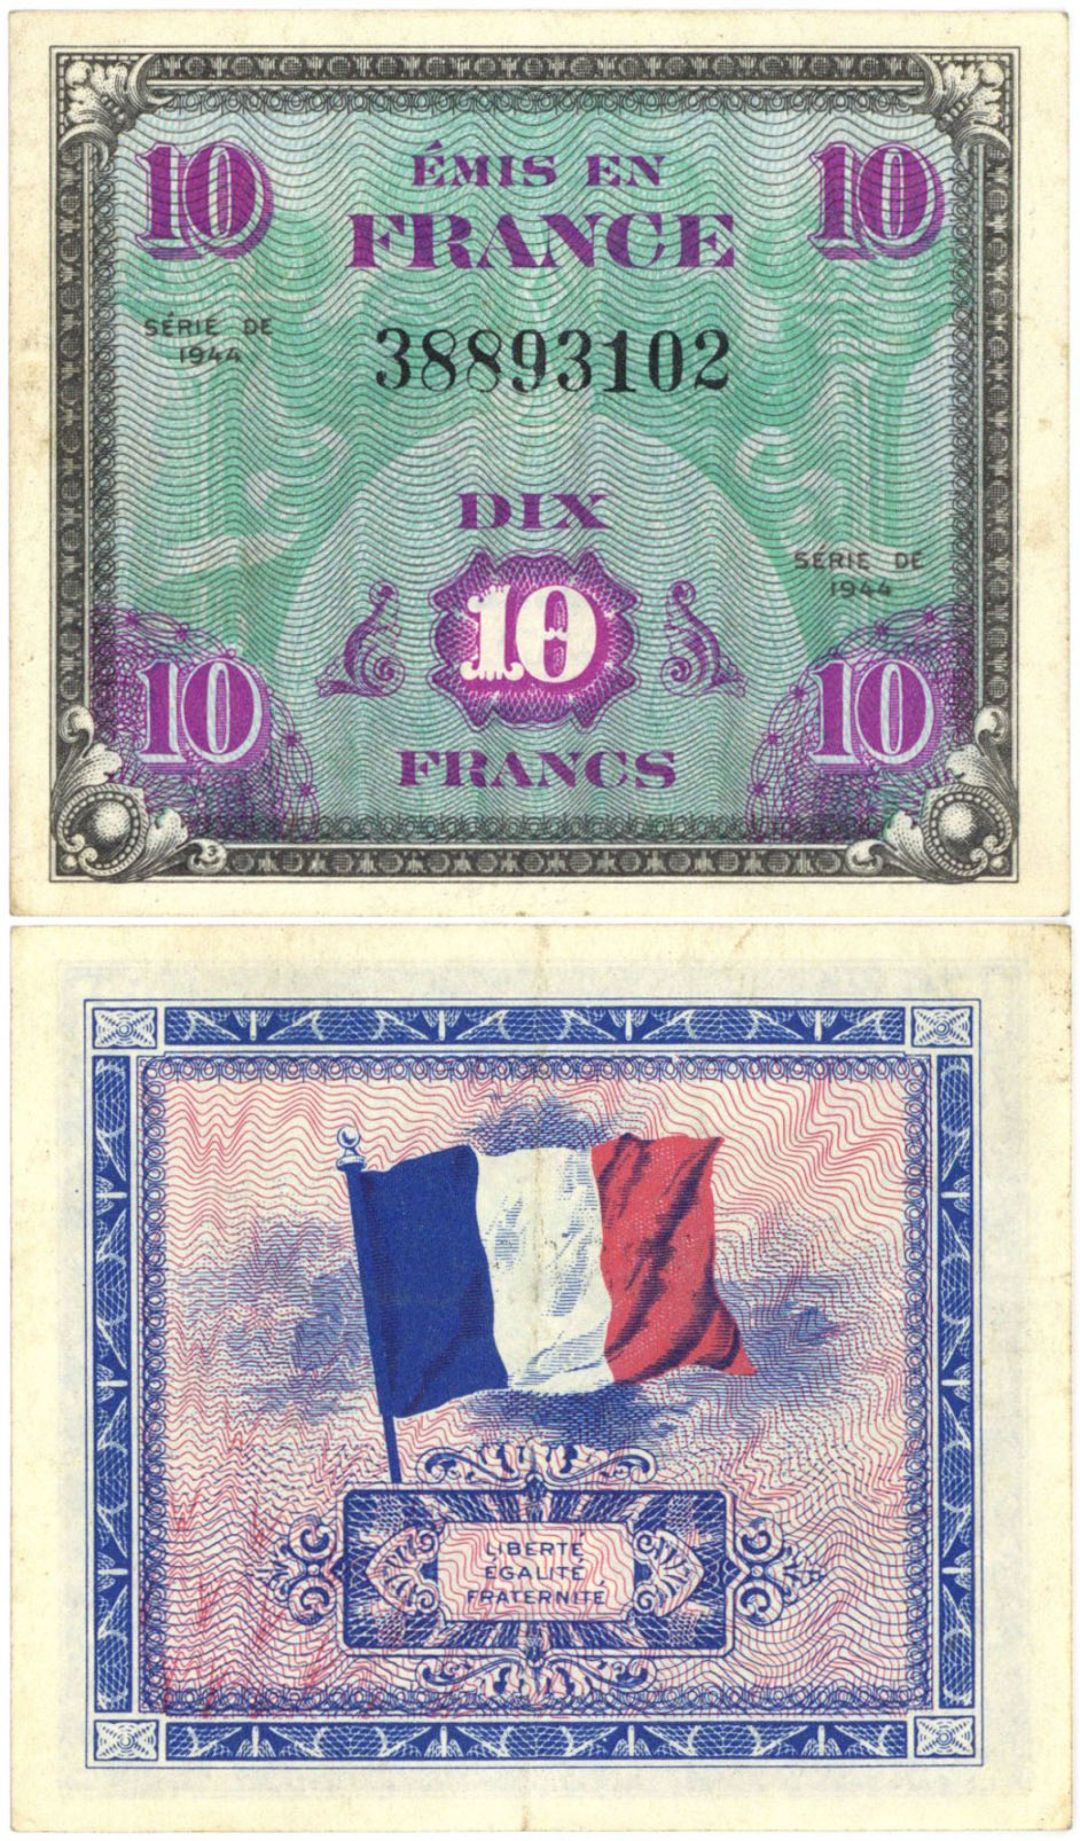 France - 10 French Francs - P-116a - 1944 dated Foreign Paper Money - Very Fine Condition